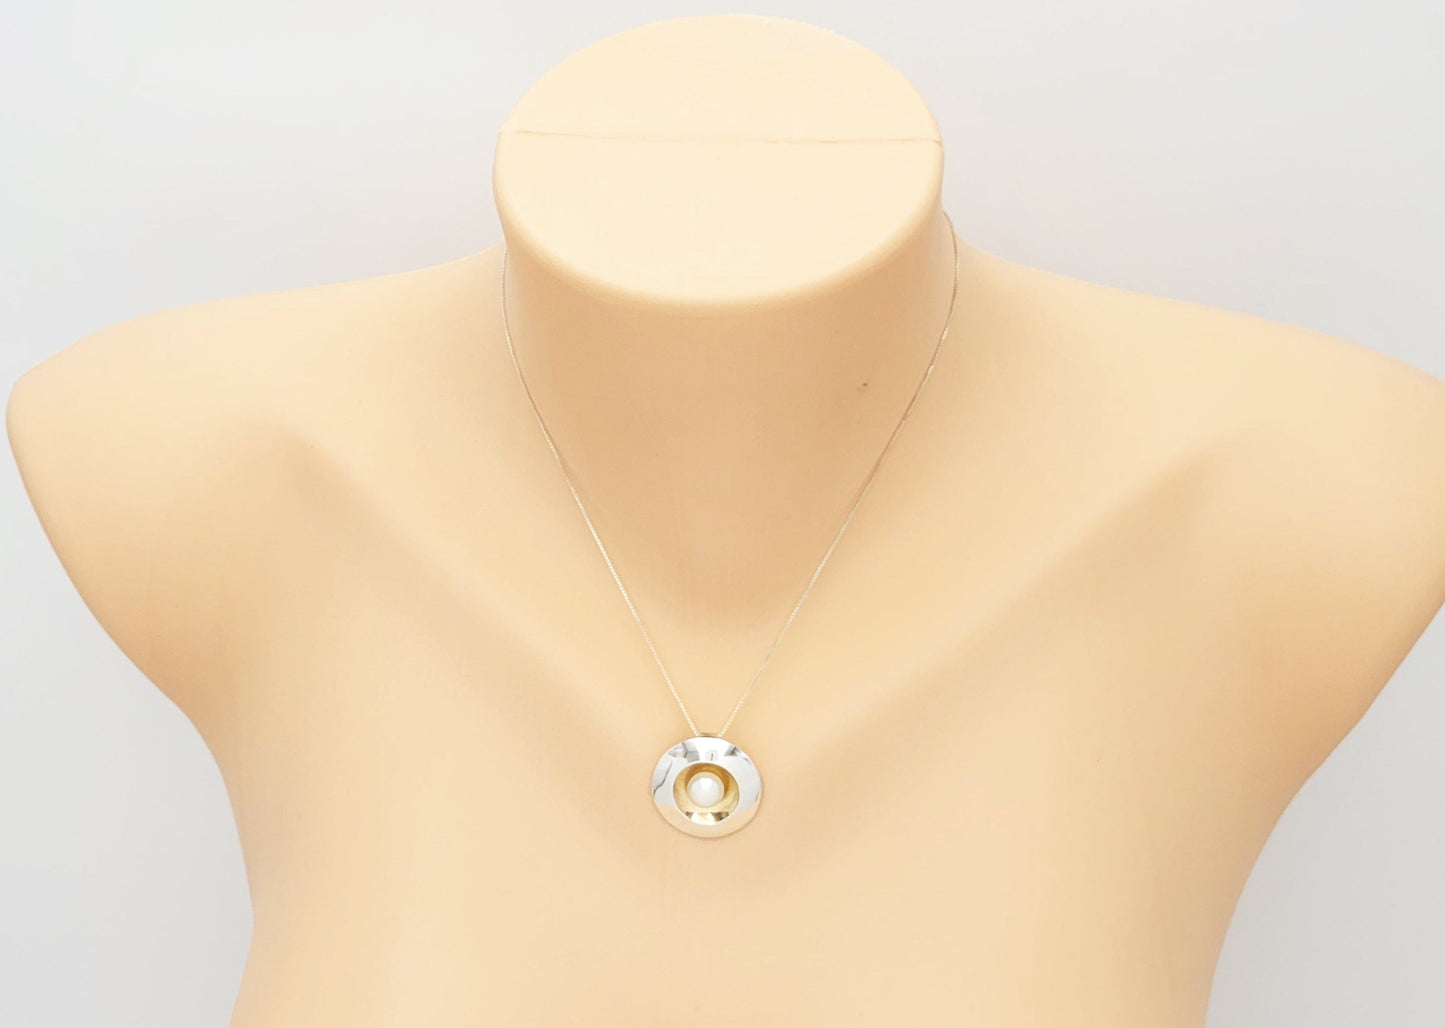 H & BJ Mackie Jewelry USA Designers Harry & BJ Mackie 14k Sterling Pearl Dome Pendant Necklace